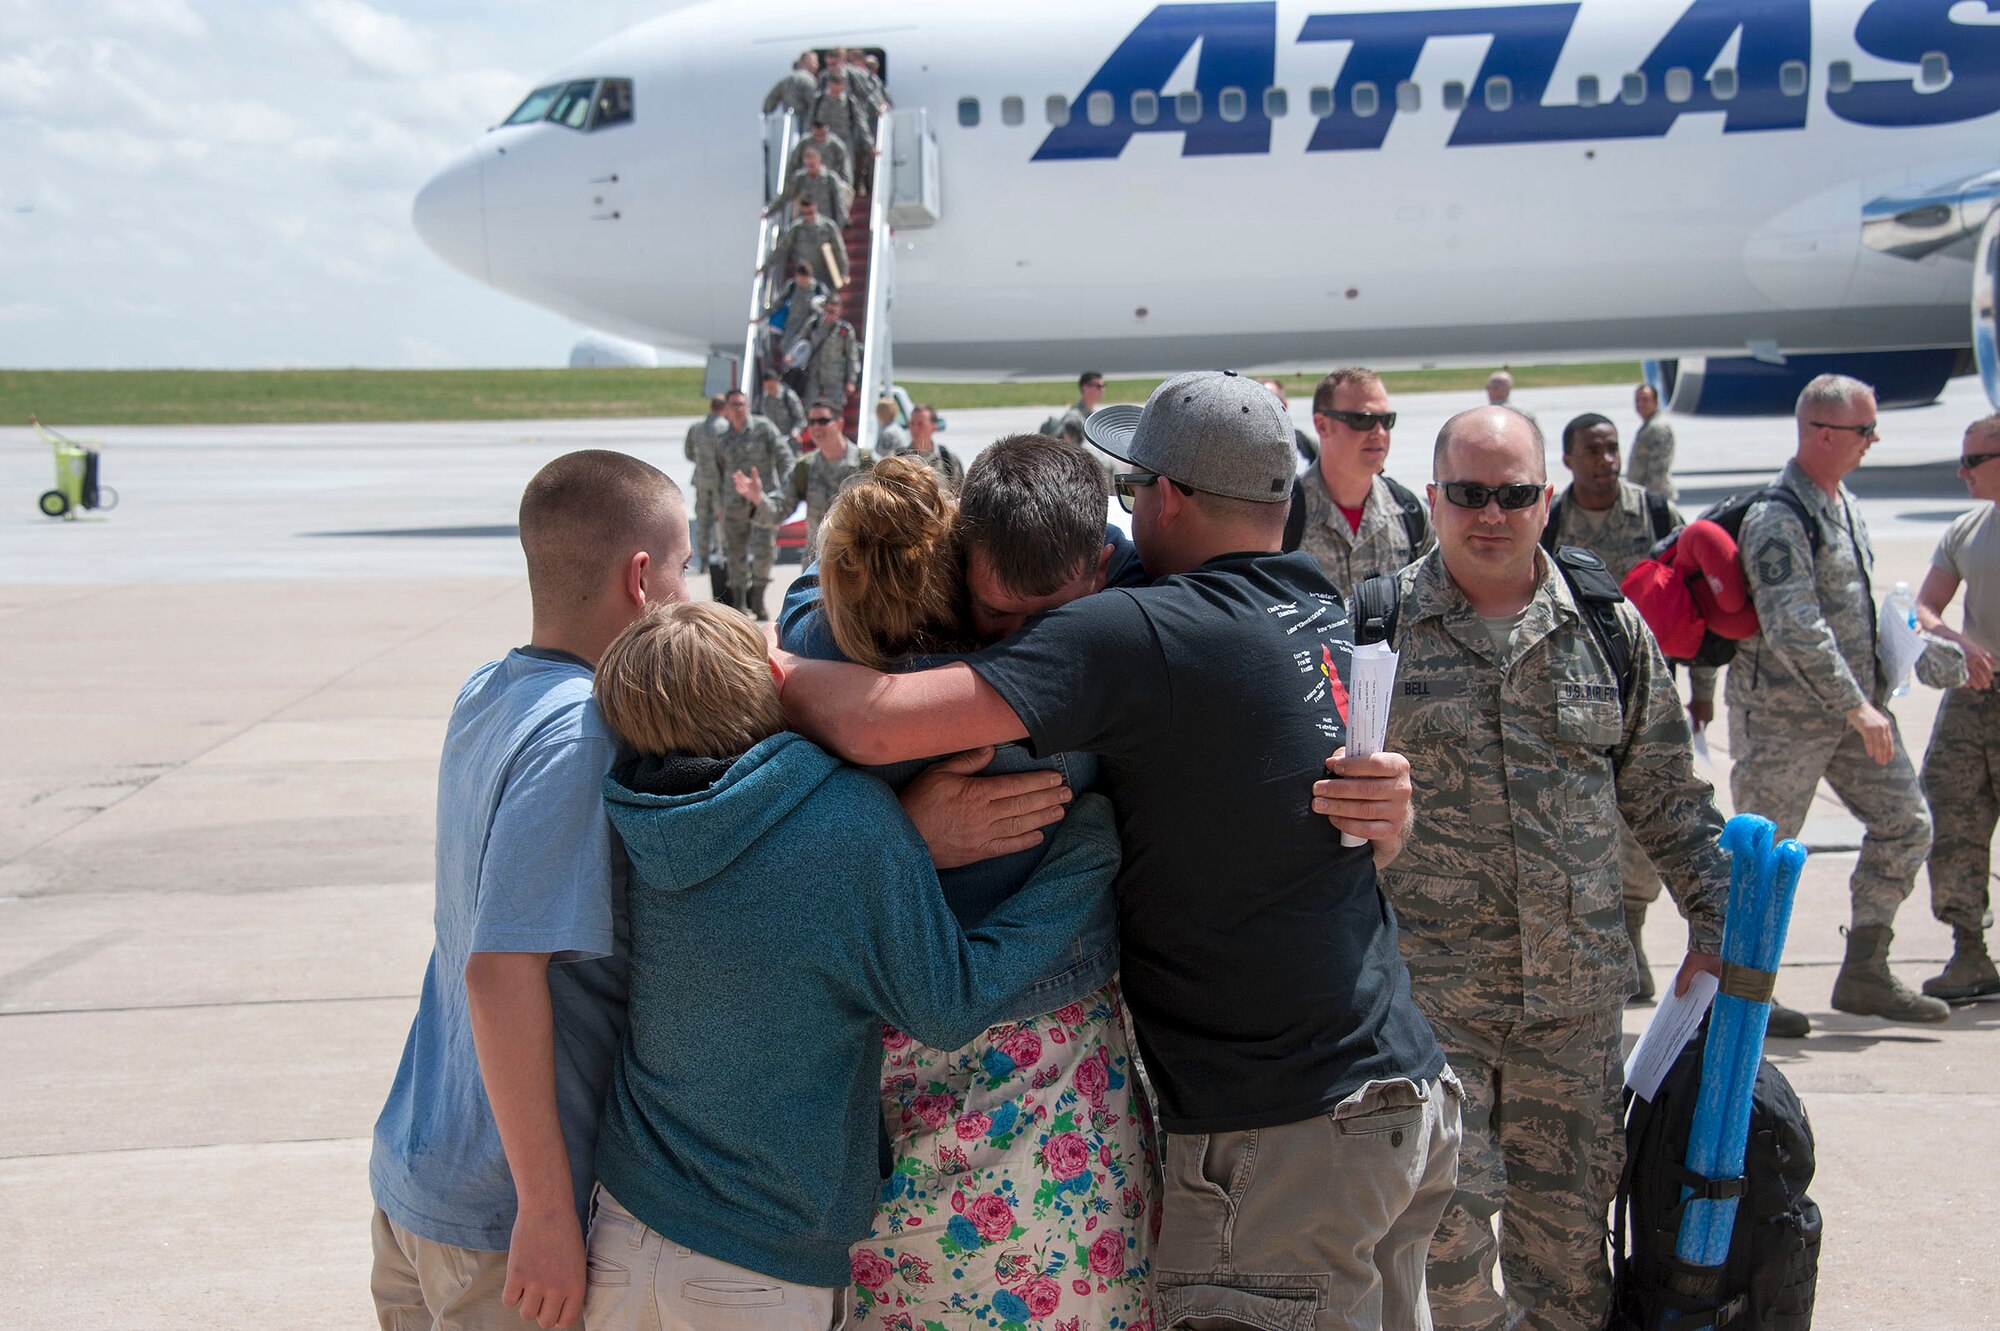 Family and friends of 140th Wing members greet their loved ones with big hugs at Buckley AFB, Colo. May 15, 2015. Over 200 Airmen from the Colorado Air National Guard unit returned home after being deployed as a Theater Security Package to the Republic of Korea for the past three months. (U.S. Air National Guard photo by Senior Master Sgt. John Rohrer) 